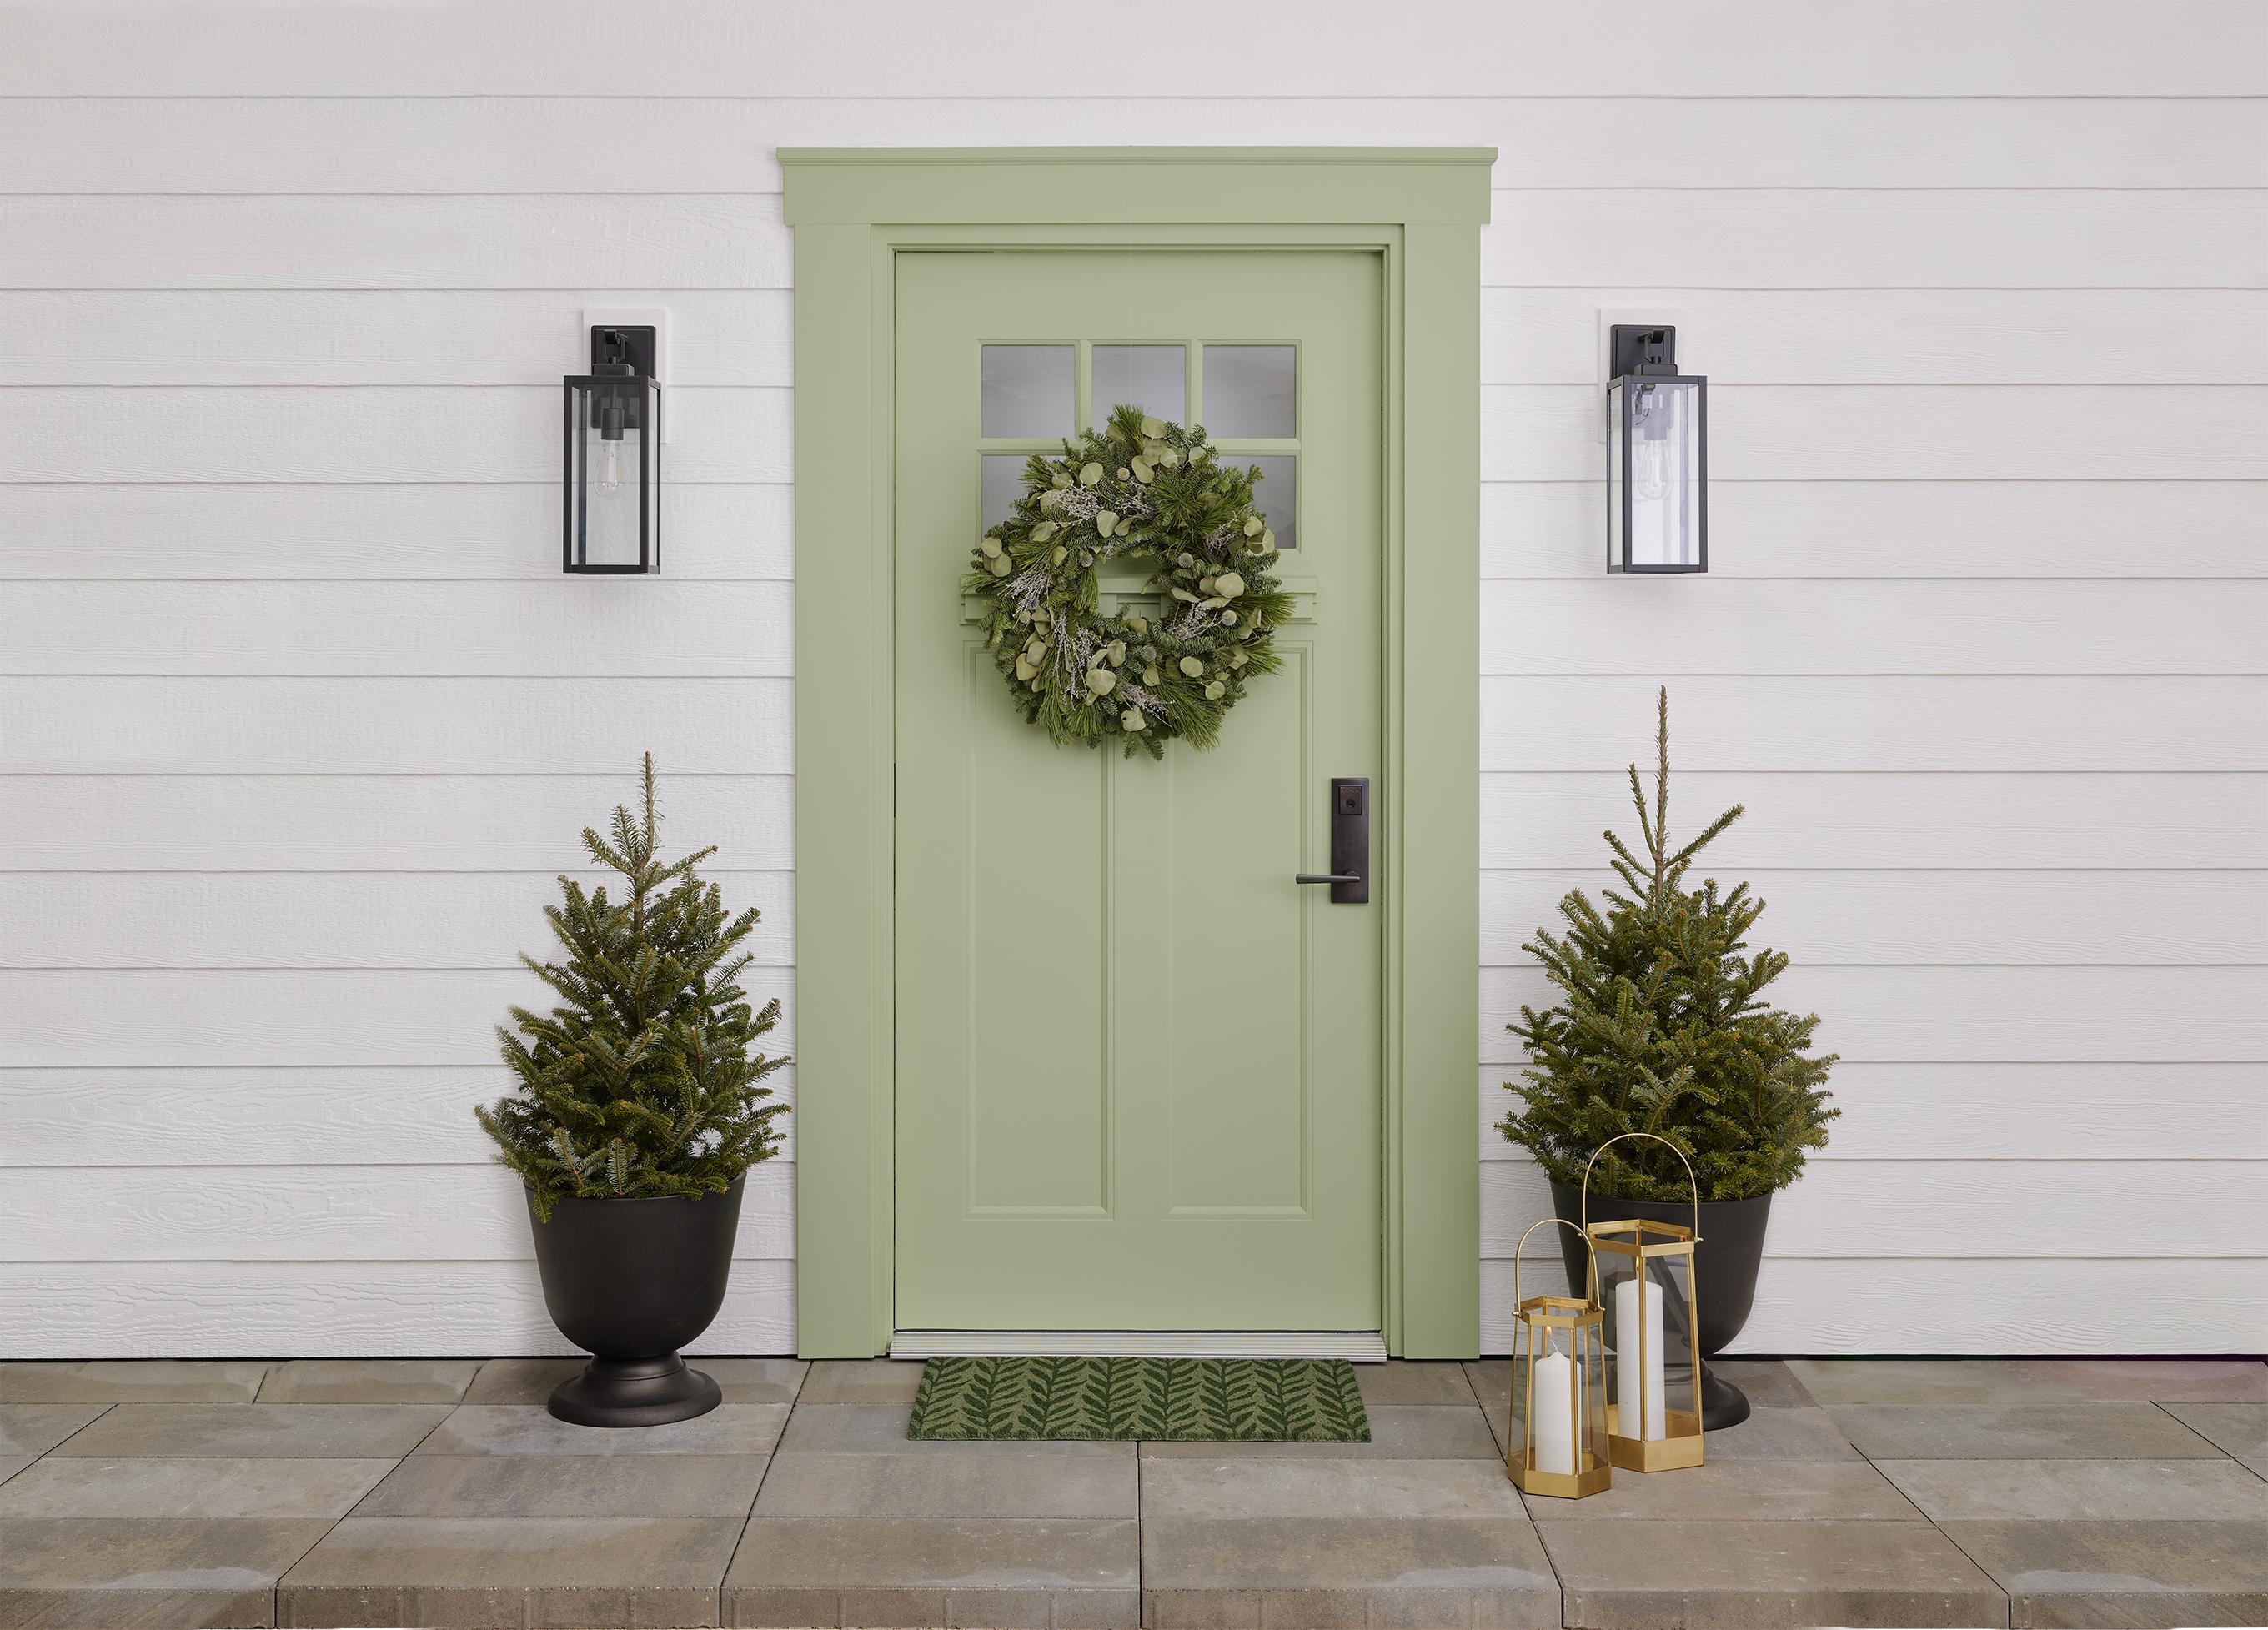 Pale-green door with wreath and doormat. Two potted evergreens and gold lanterns frame the door.